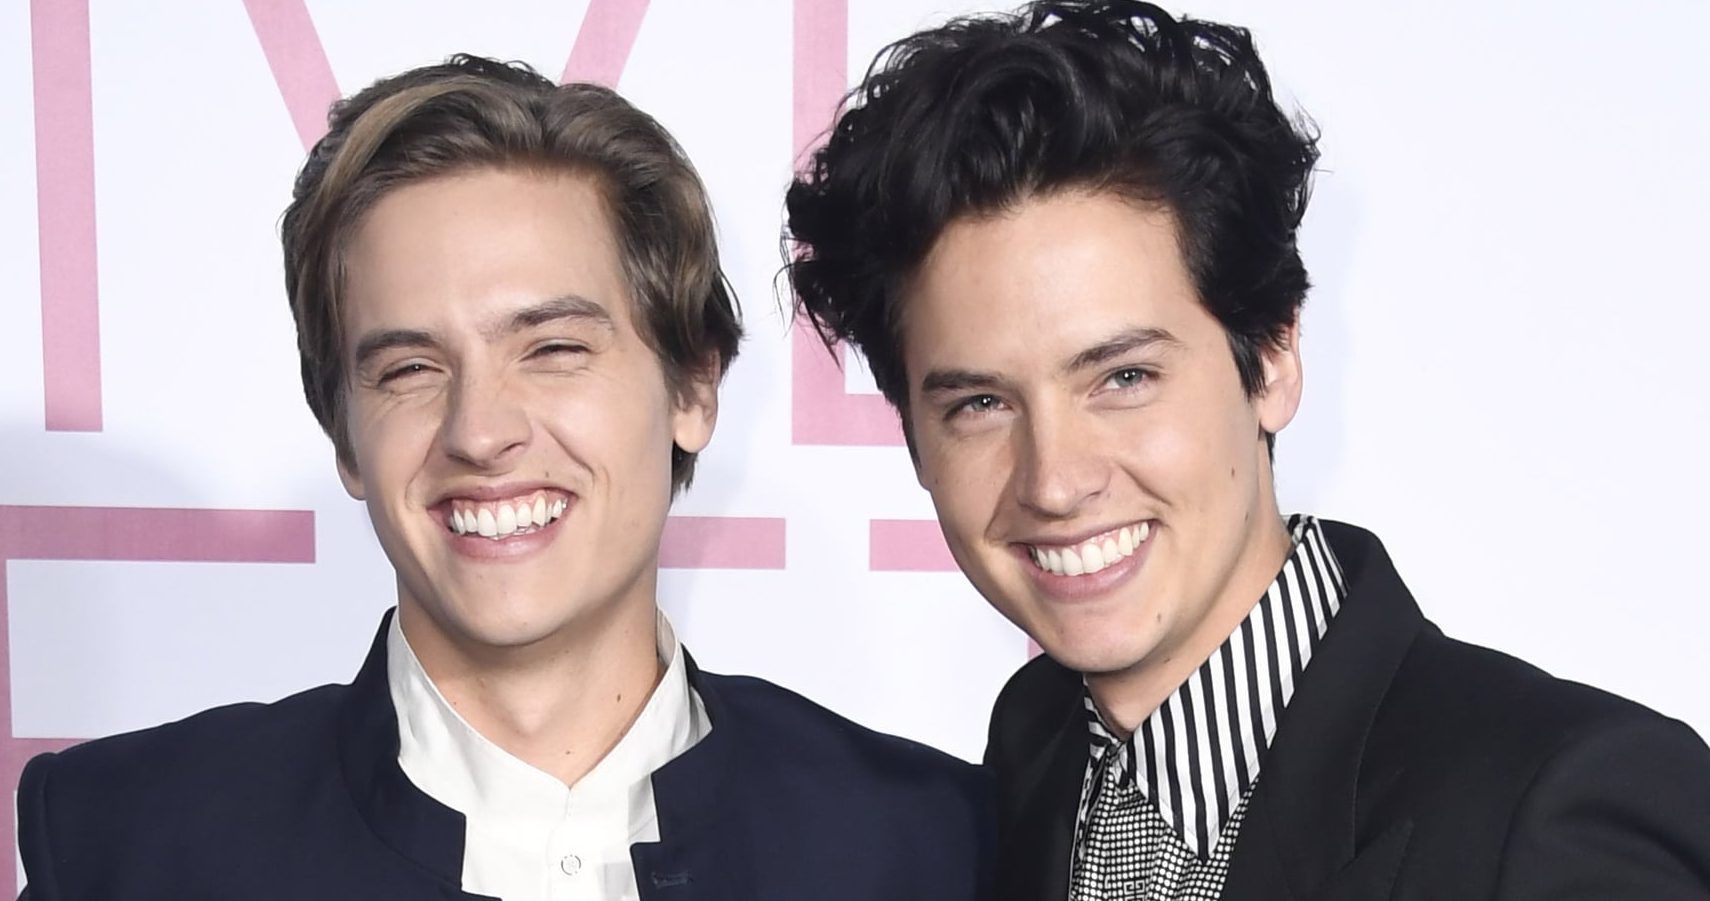 Dylan and Cole Sprouse attending an event